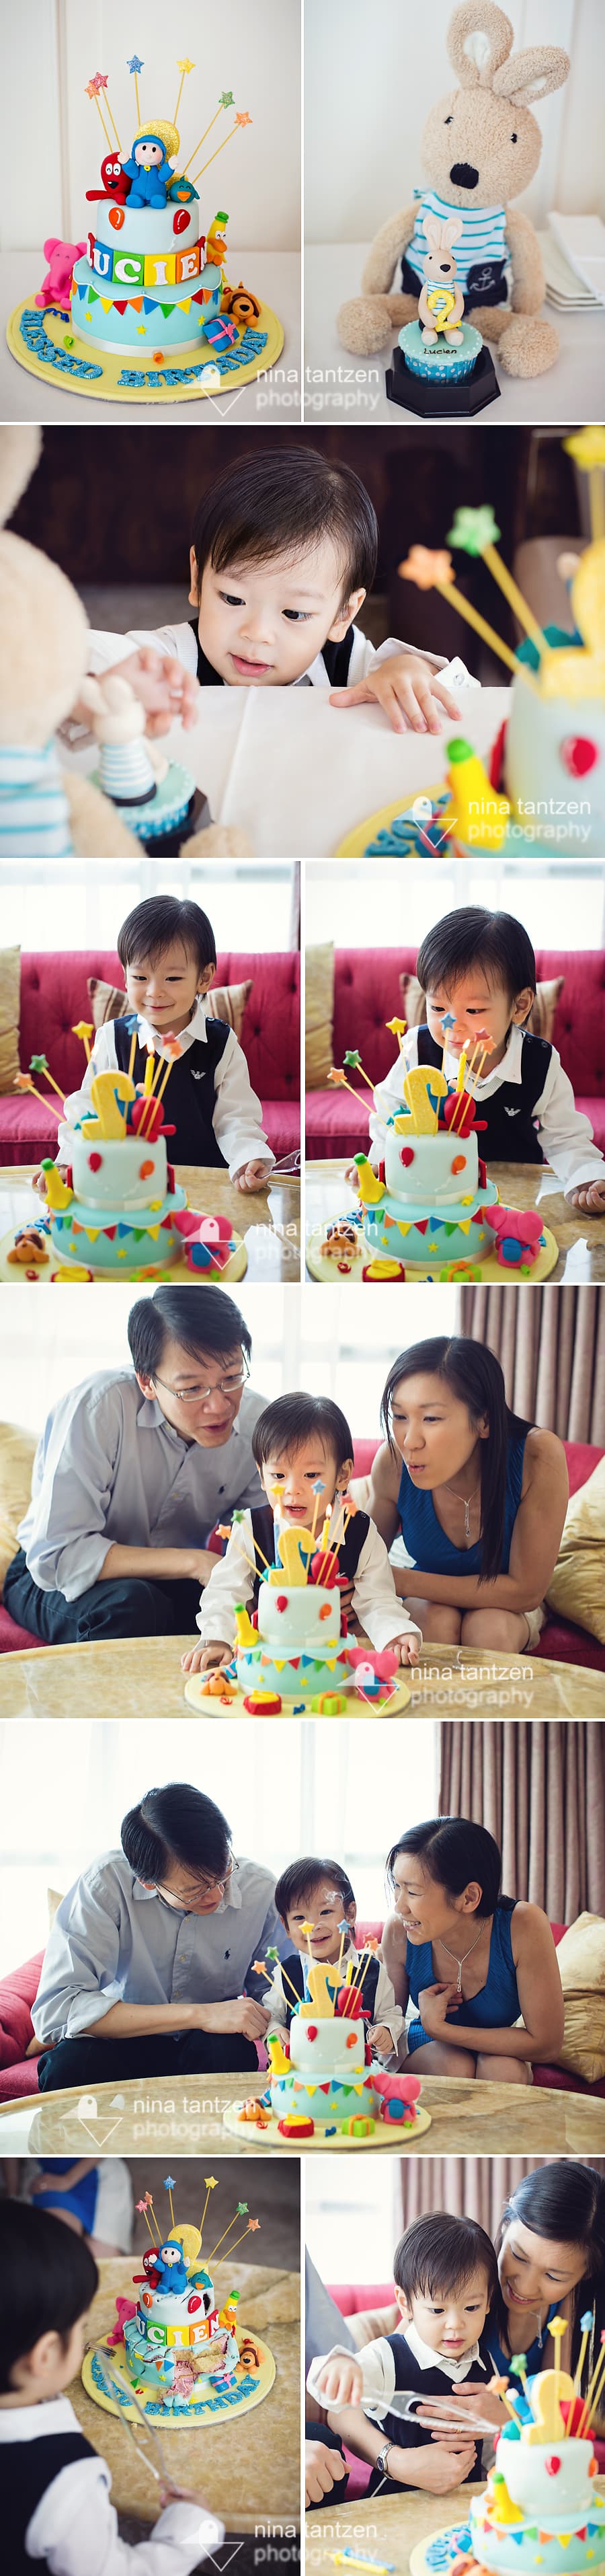 lifestyle family photographer in singapore